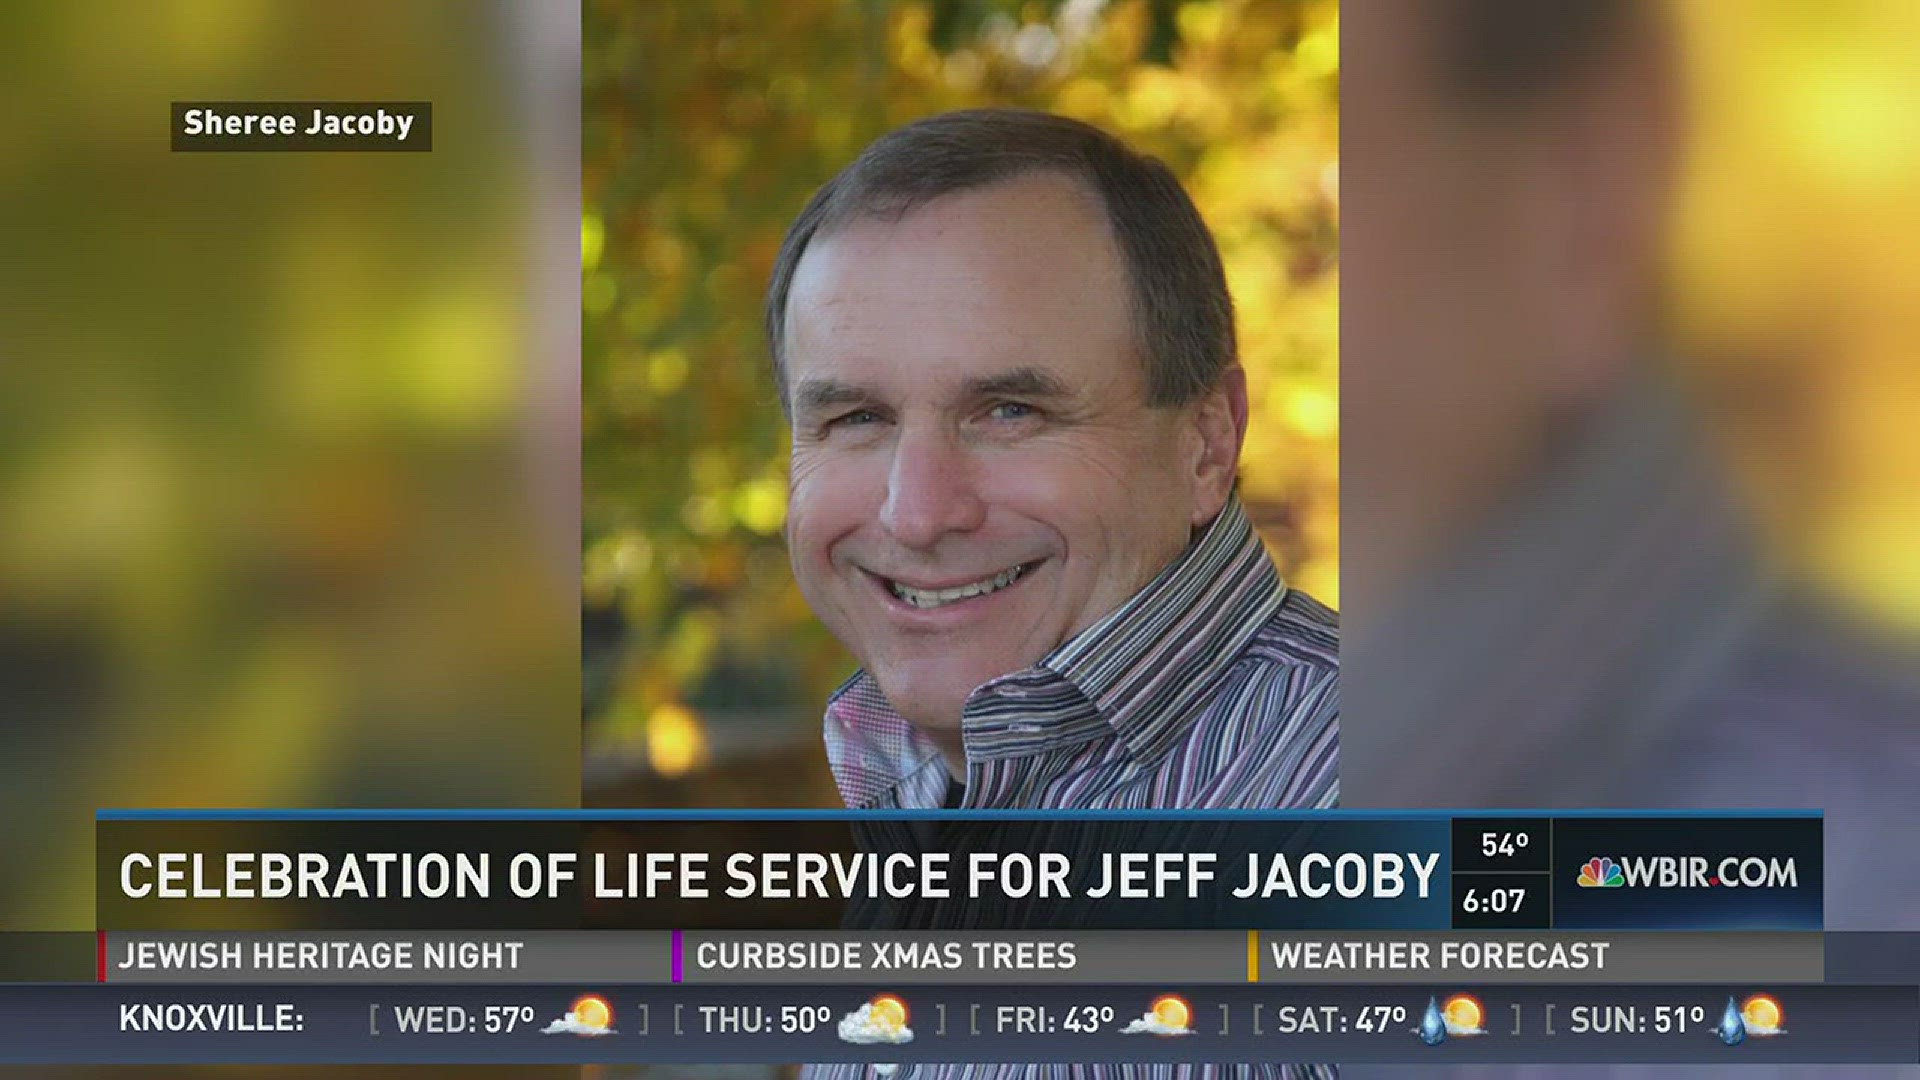 Dec. 27, 2016: A celebration of life service for longtime Knoxville radio man Jeff Jacoby will be held Thursday at Cokesbury United Methodist Church.